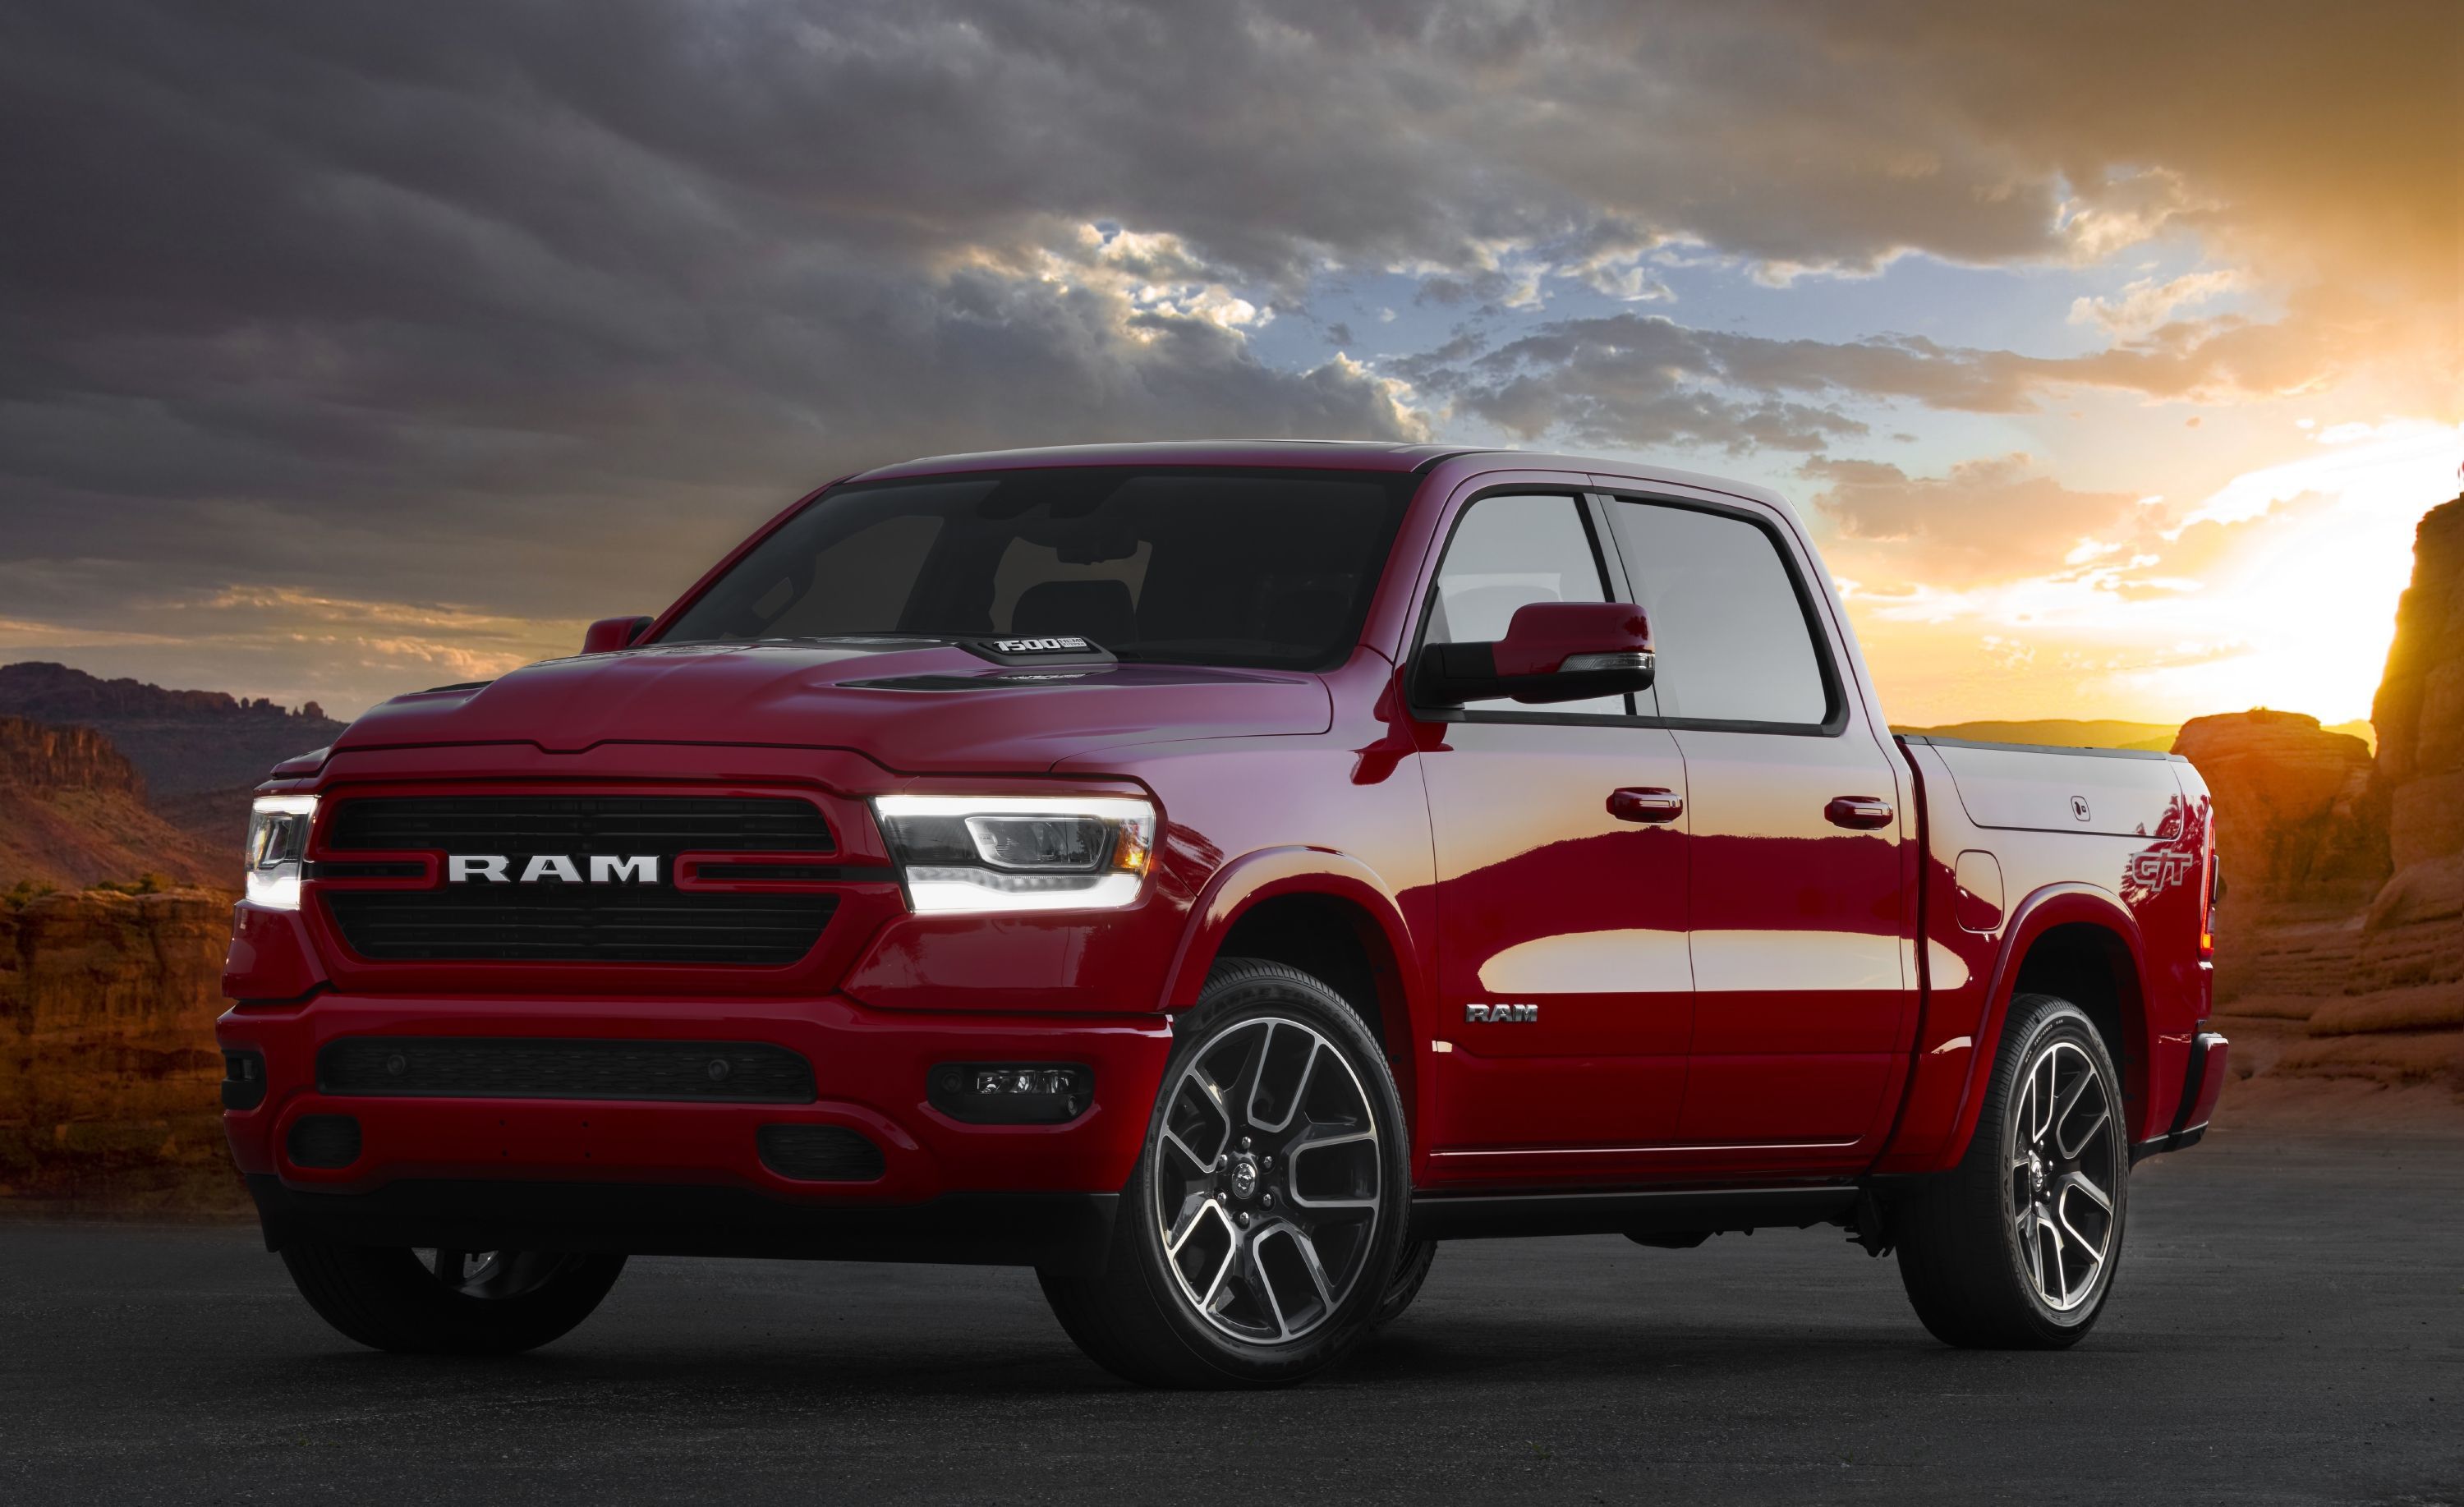 2022 Ram 1500 Laramie G/T: Hot-rod pickup with less subtle touch